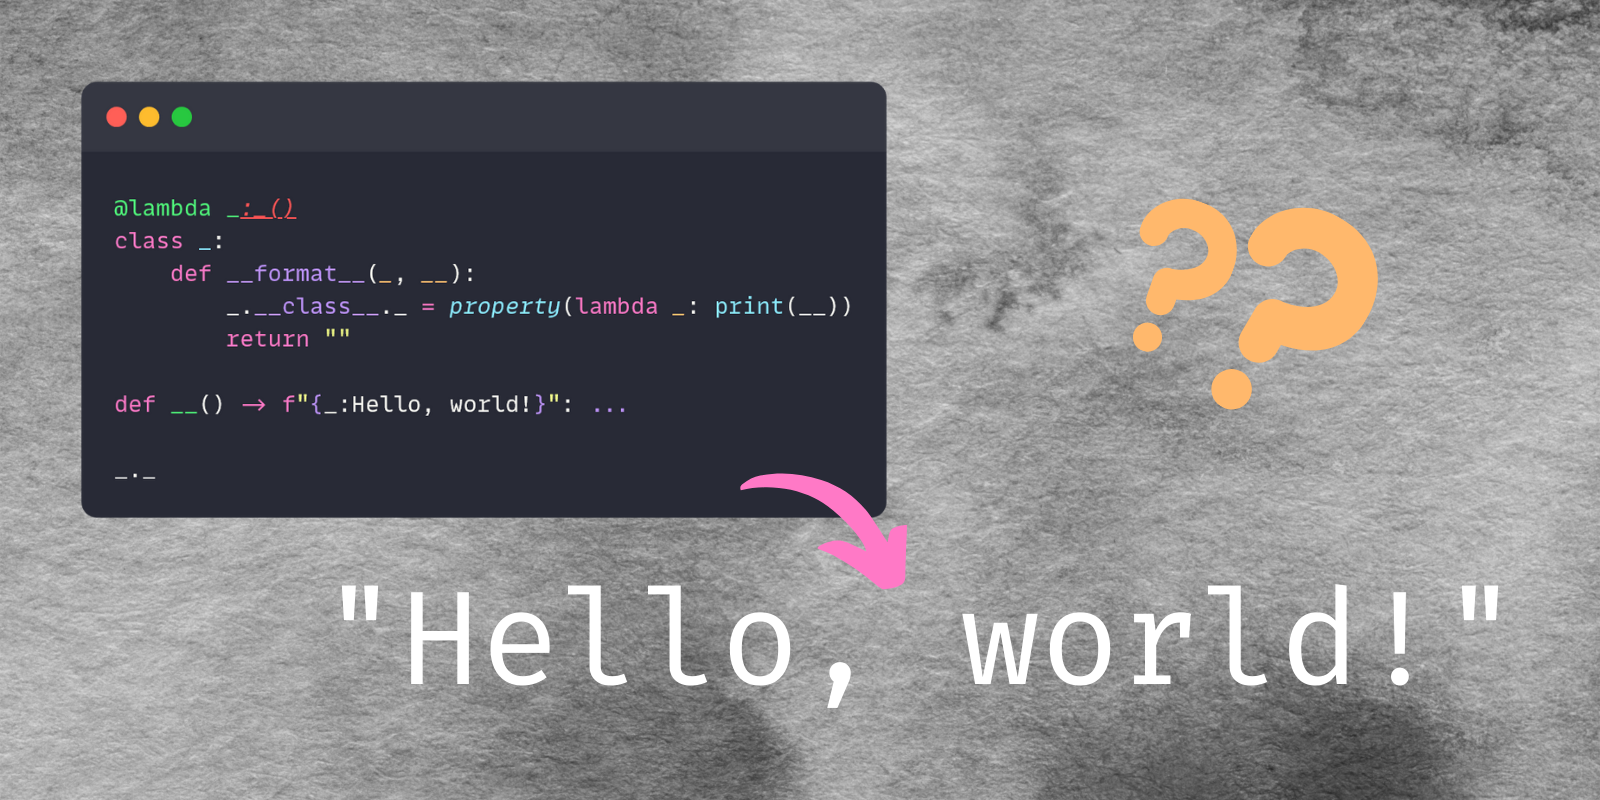 A really weird code snippet that contains code that is supposed to print “Hello, world!”.